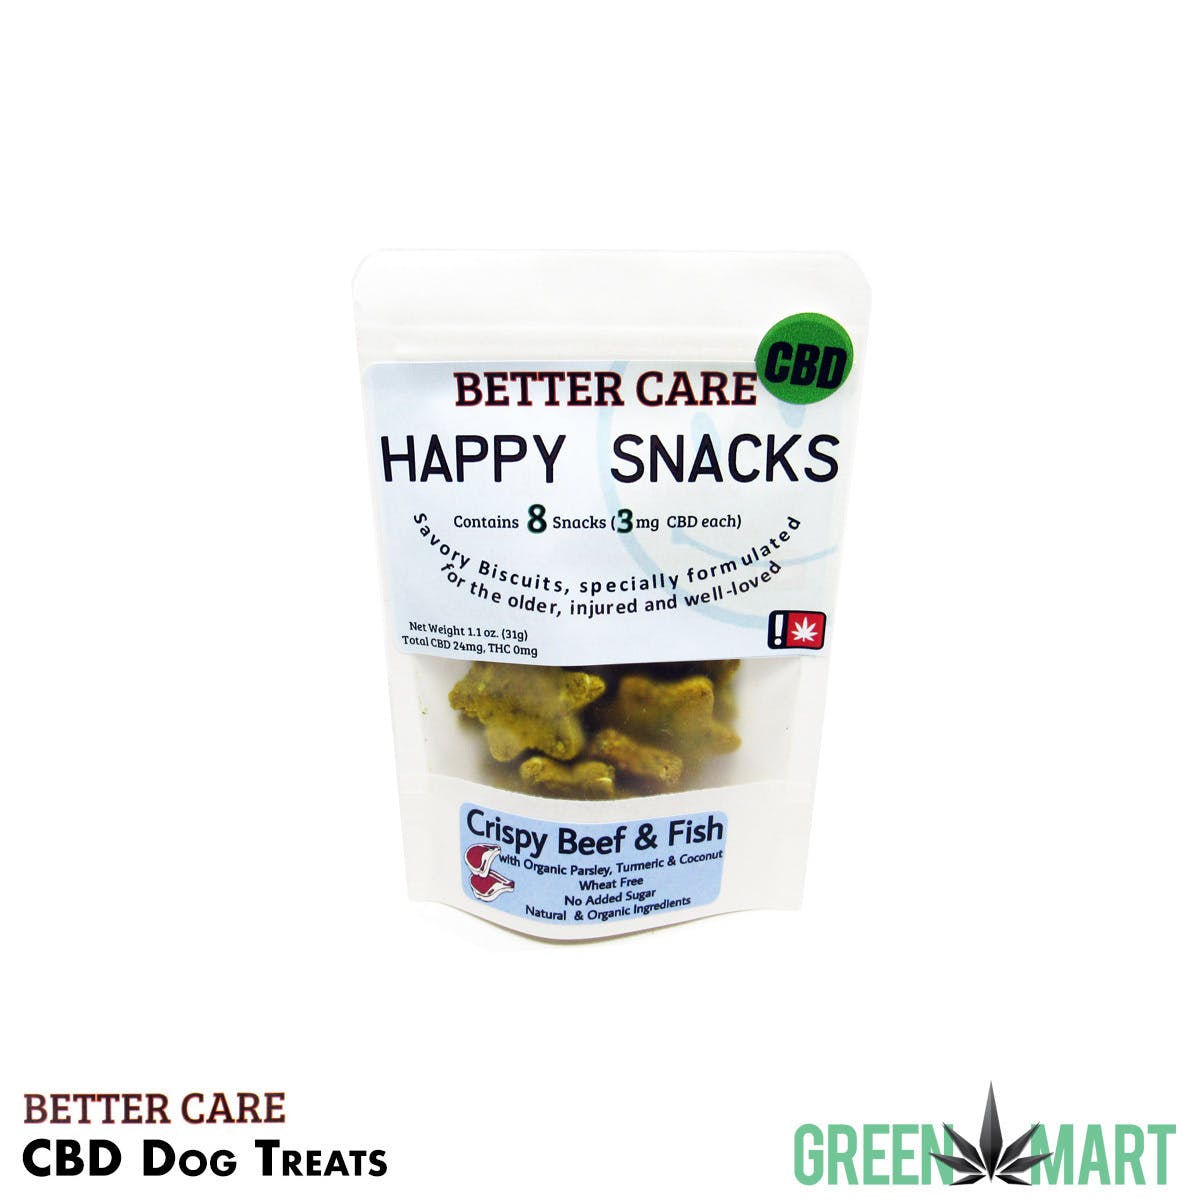 edible-better-care-dog-treats-8-snack-pack